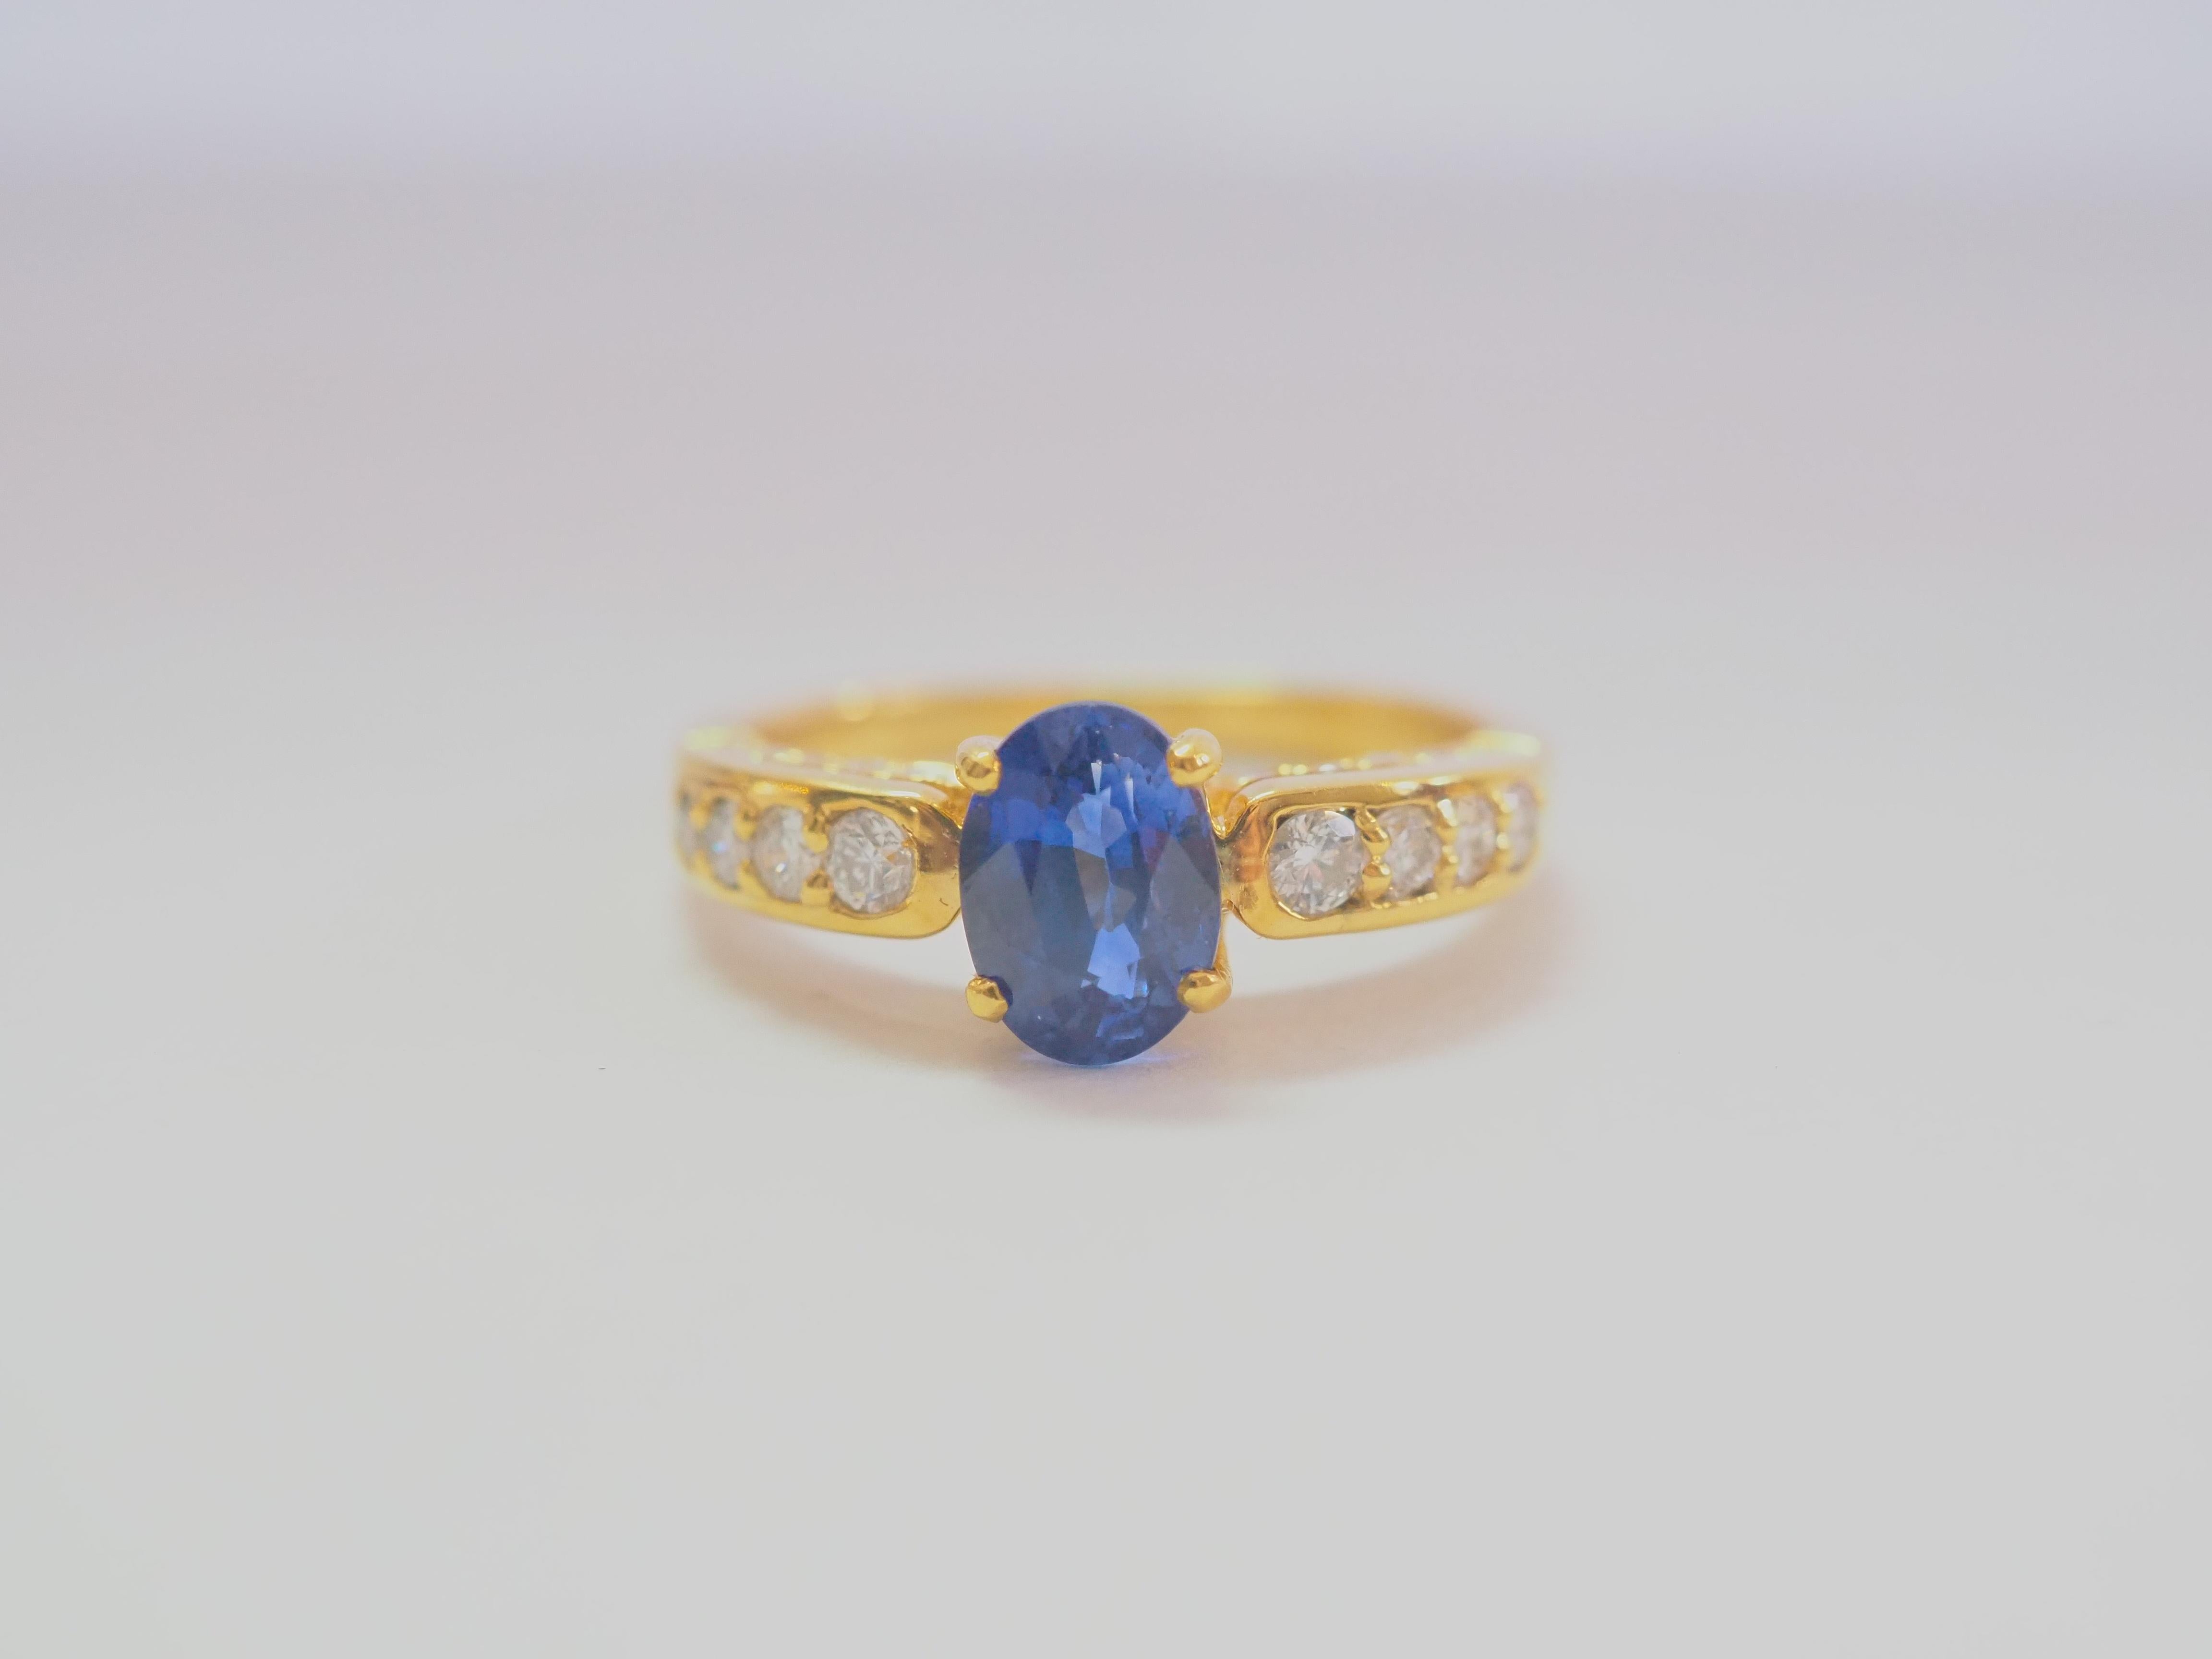 This beautiful engagement ring boasts a very stunning and almost eye clean blue sapphire! The sapphire is an oval cut and is very clear with good saturation of well sought after cornflower blue color. There are 8 bigger round brilliant diamonds